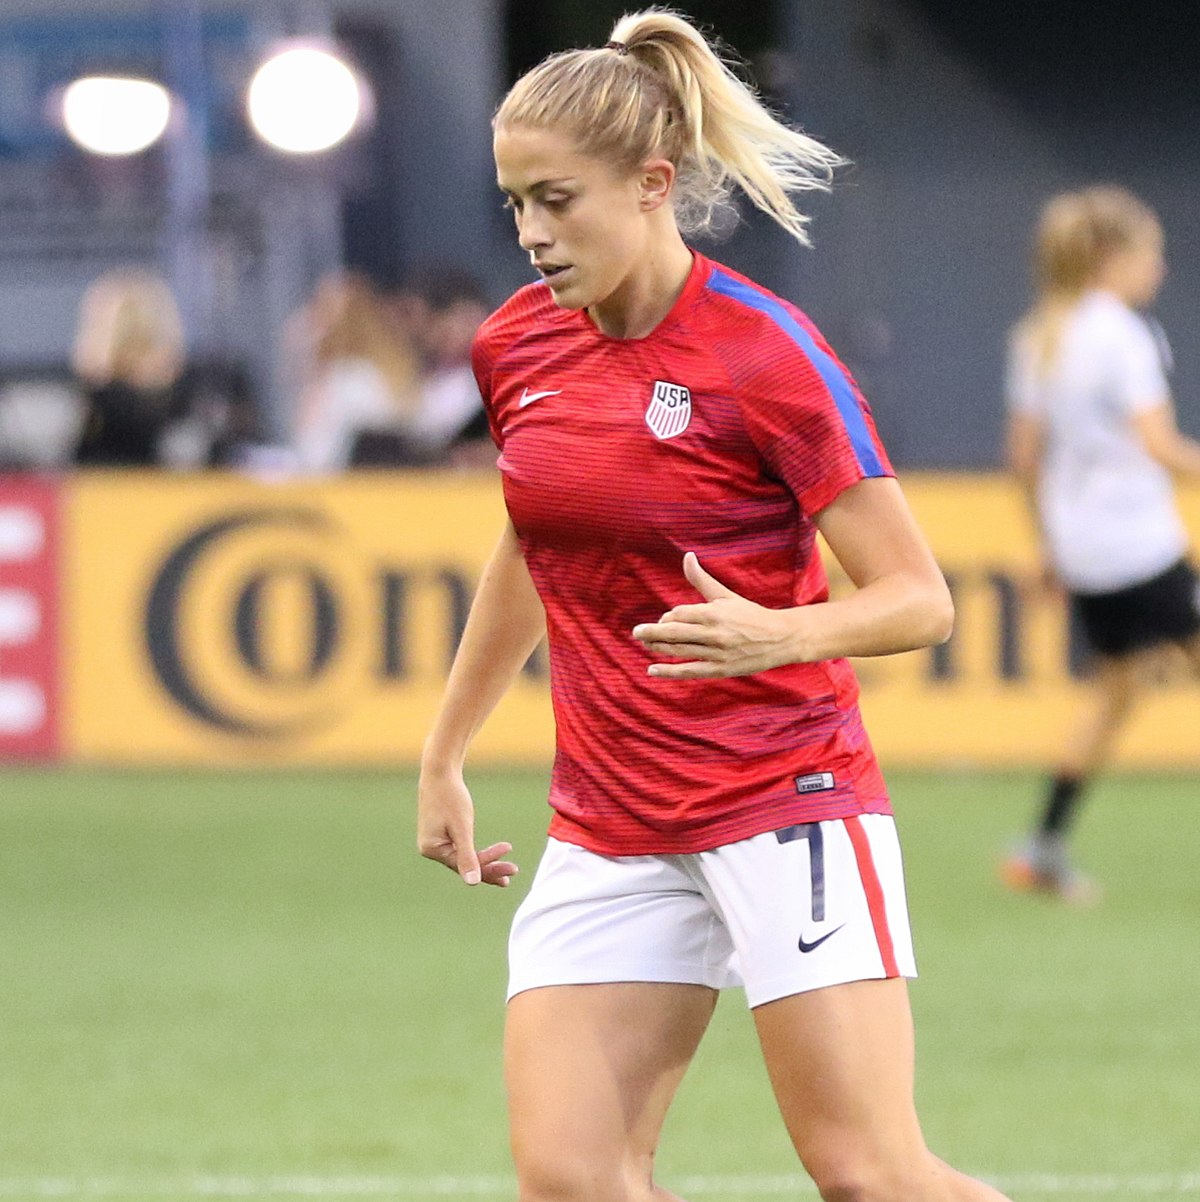 File:Abby Dahlkemper (36792787913) (cropped).jpg - Wikipedia.